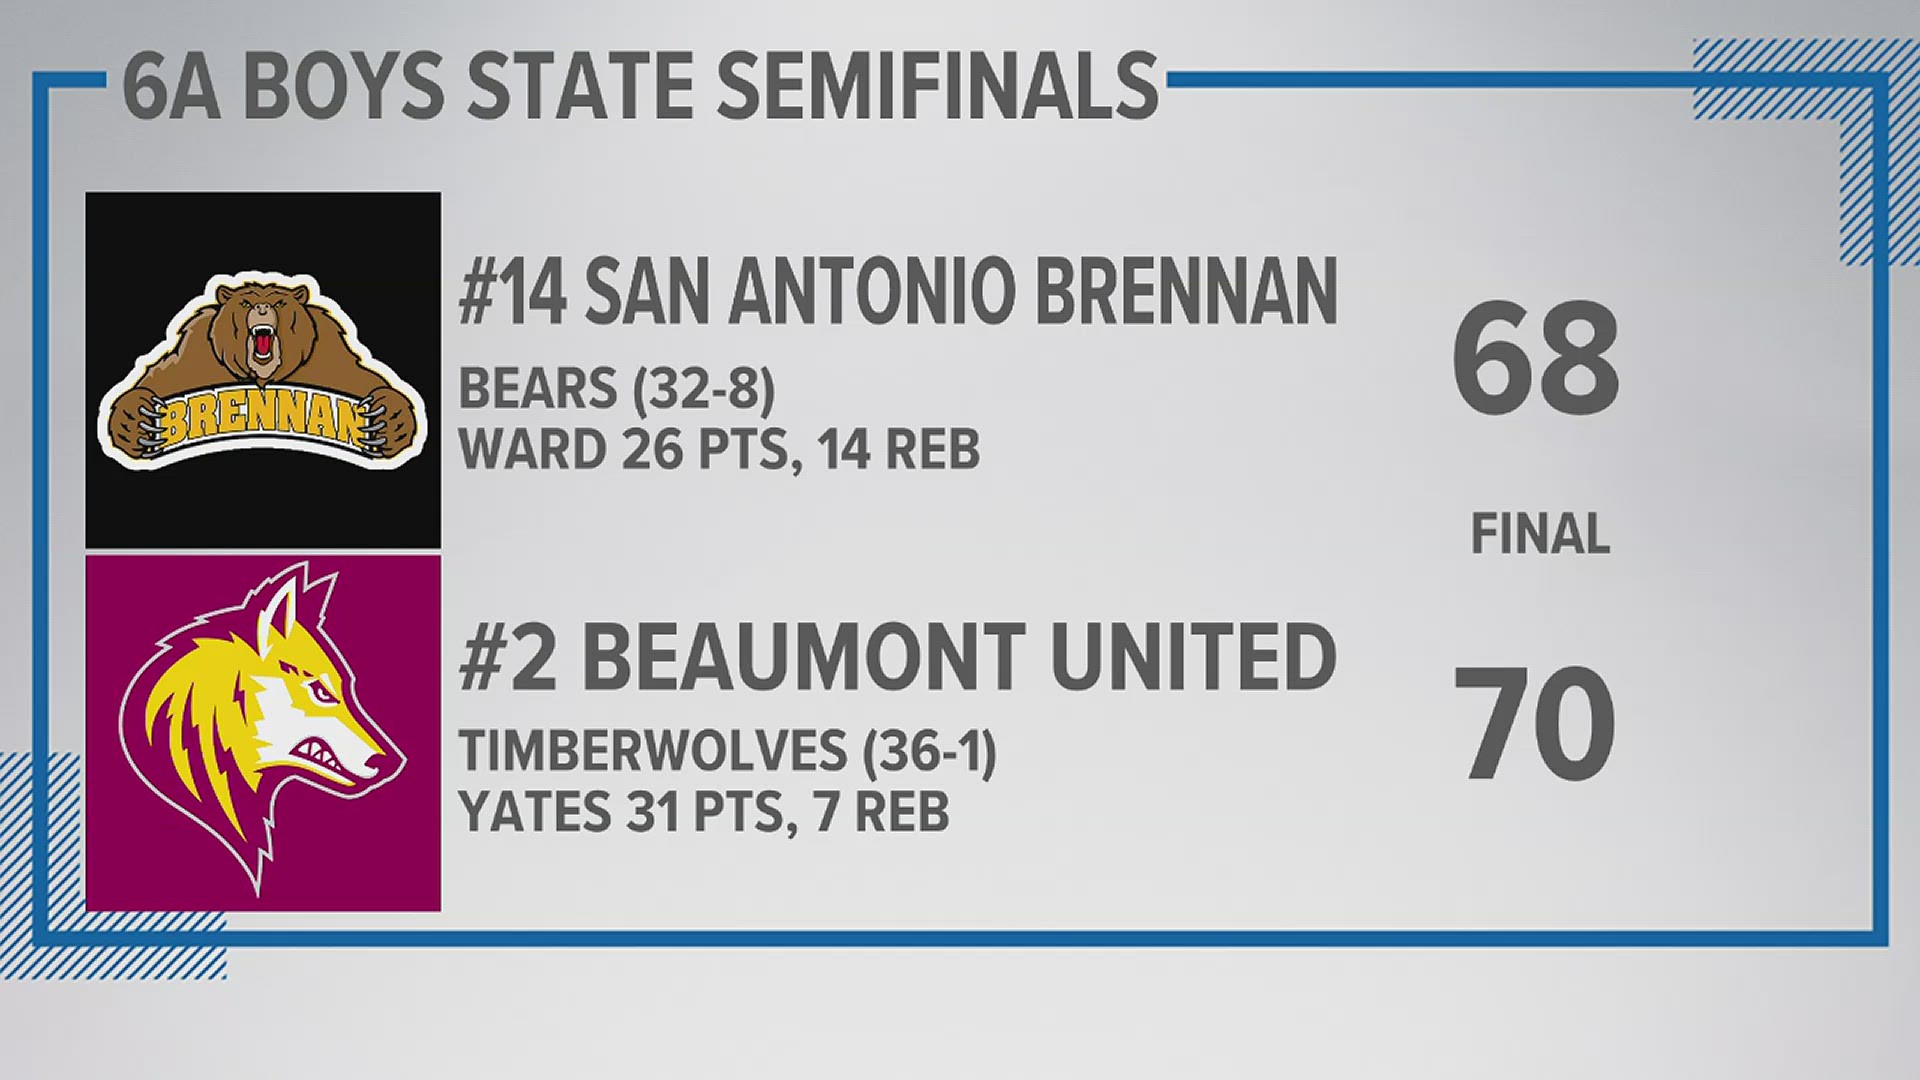 Beaumont United is the only team representing the 409 in San Antonio. They are advancing to the state championship.